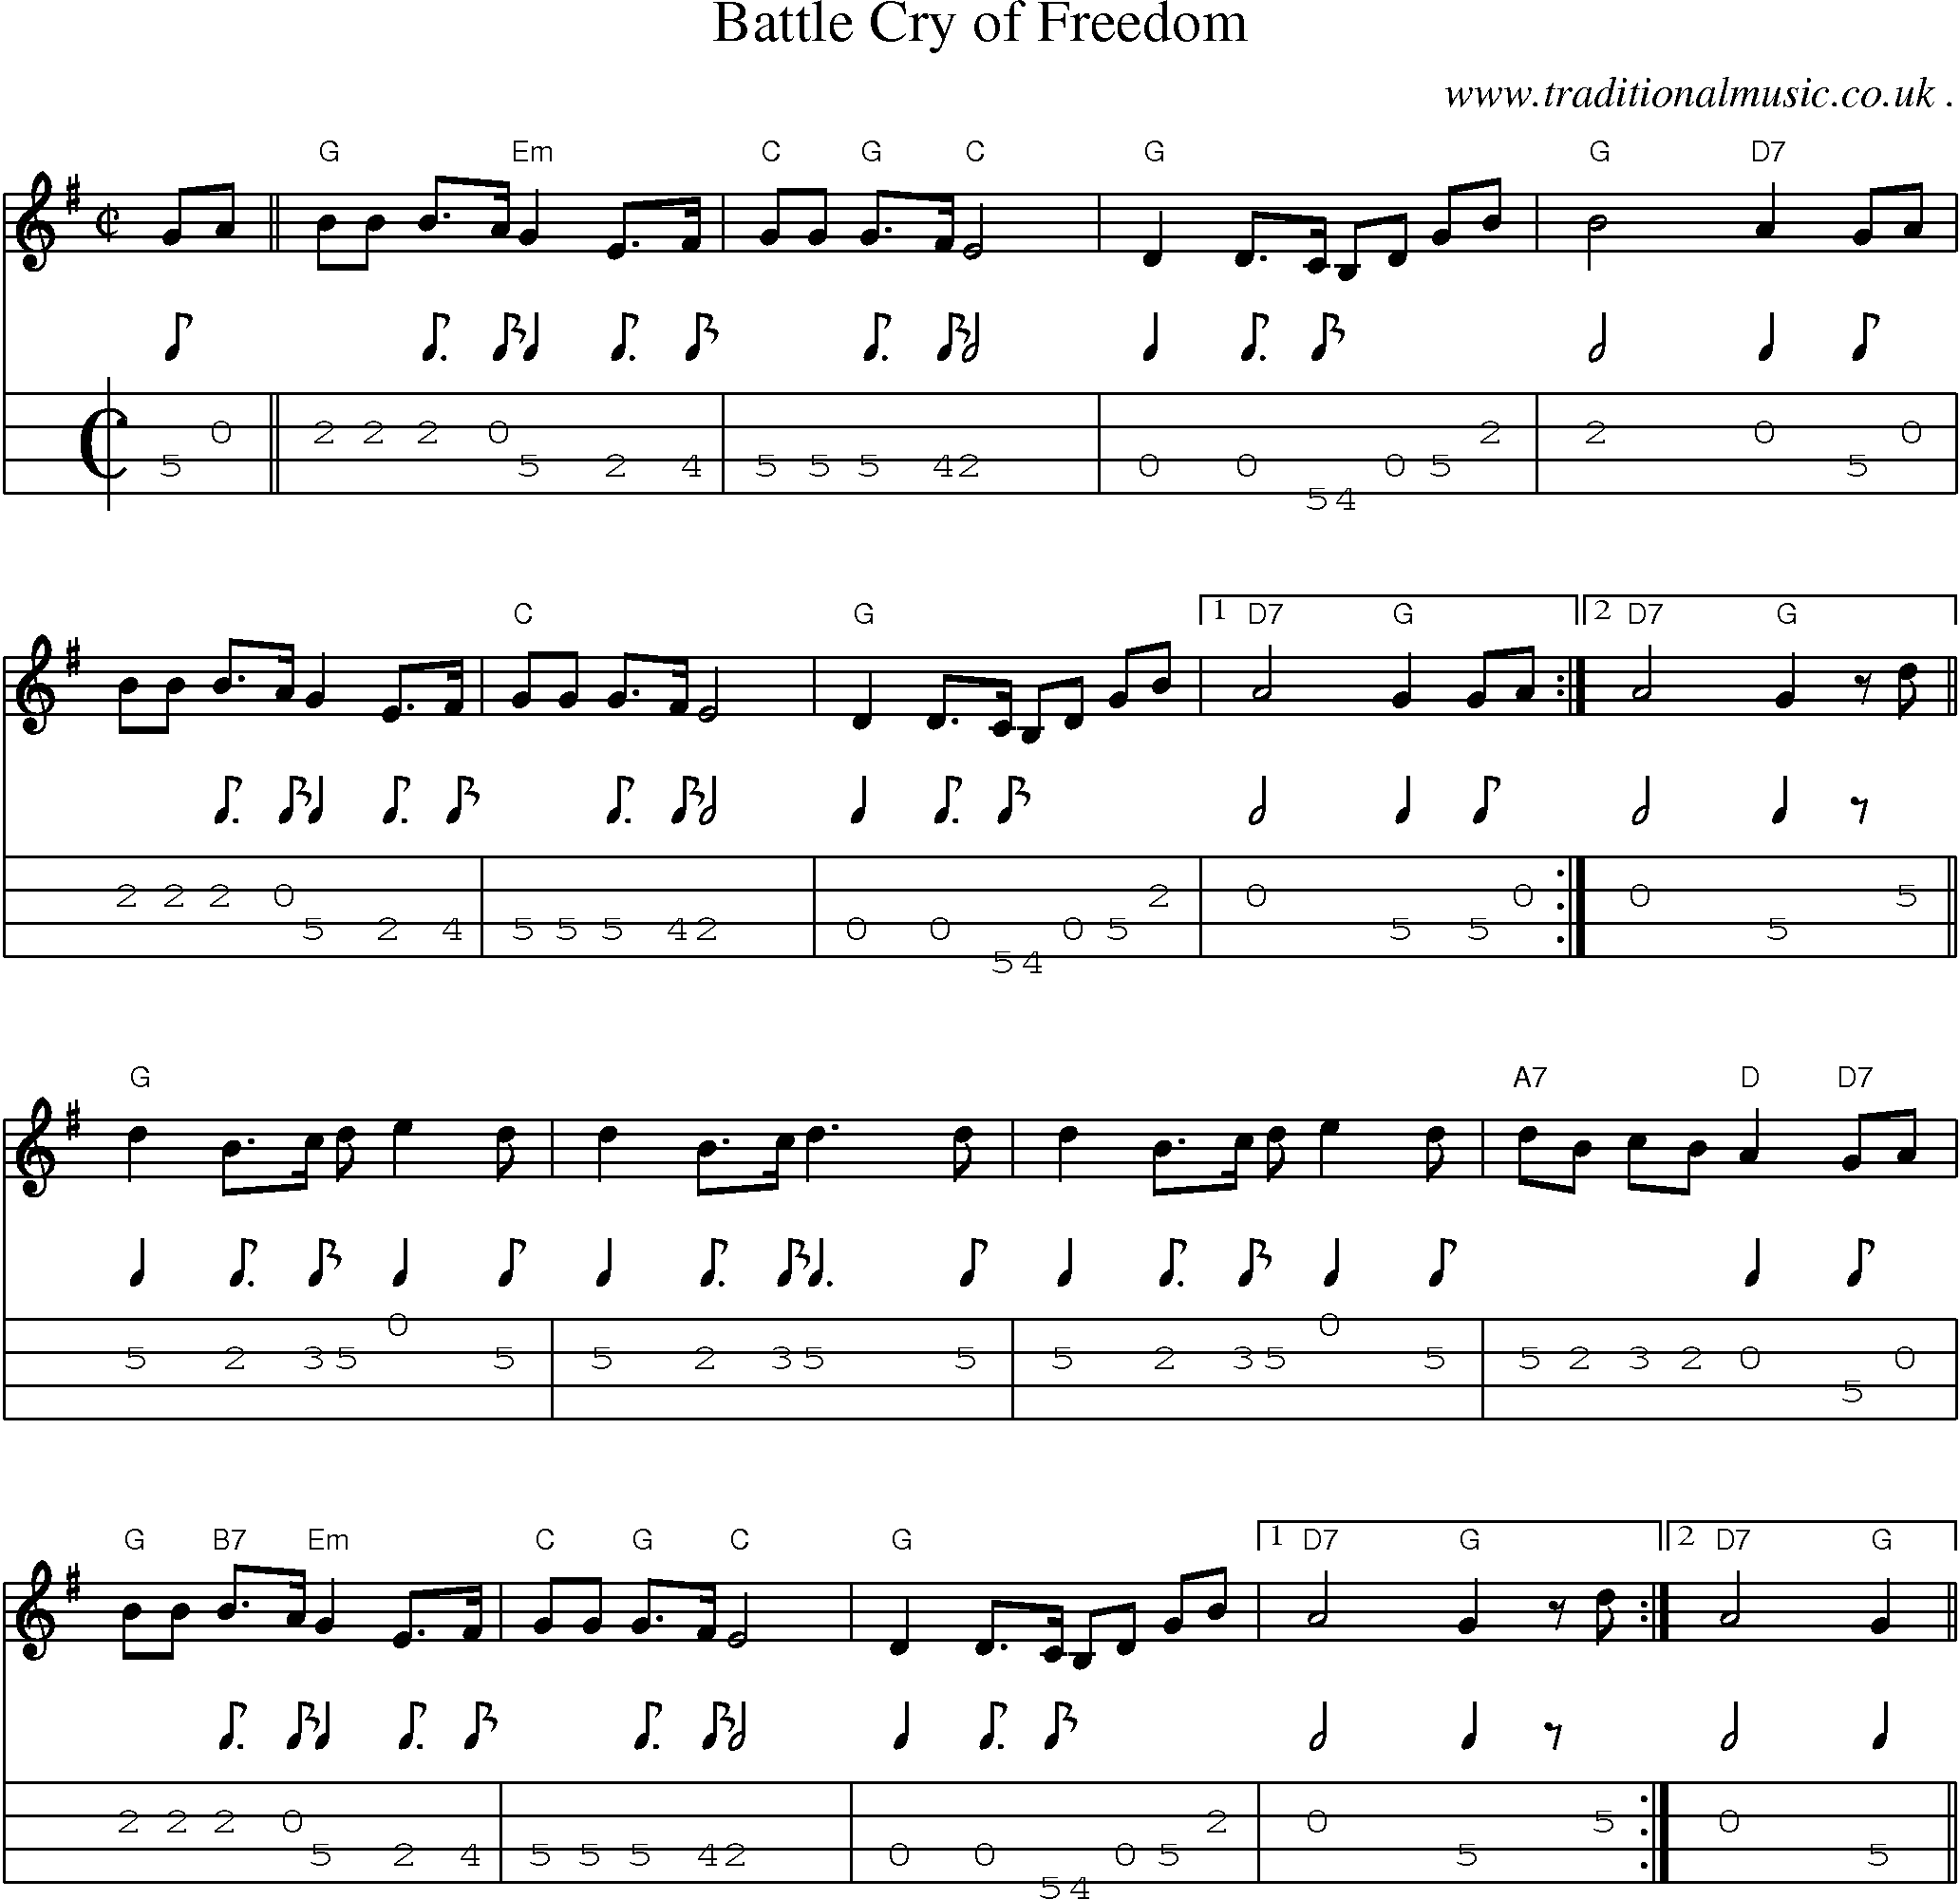 Music Score and Guitar Tabs for Battle Cry Of Freedom